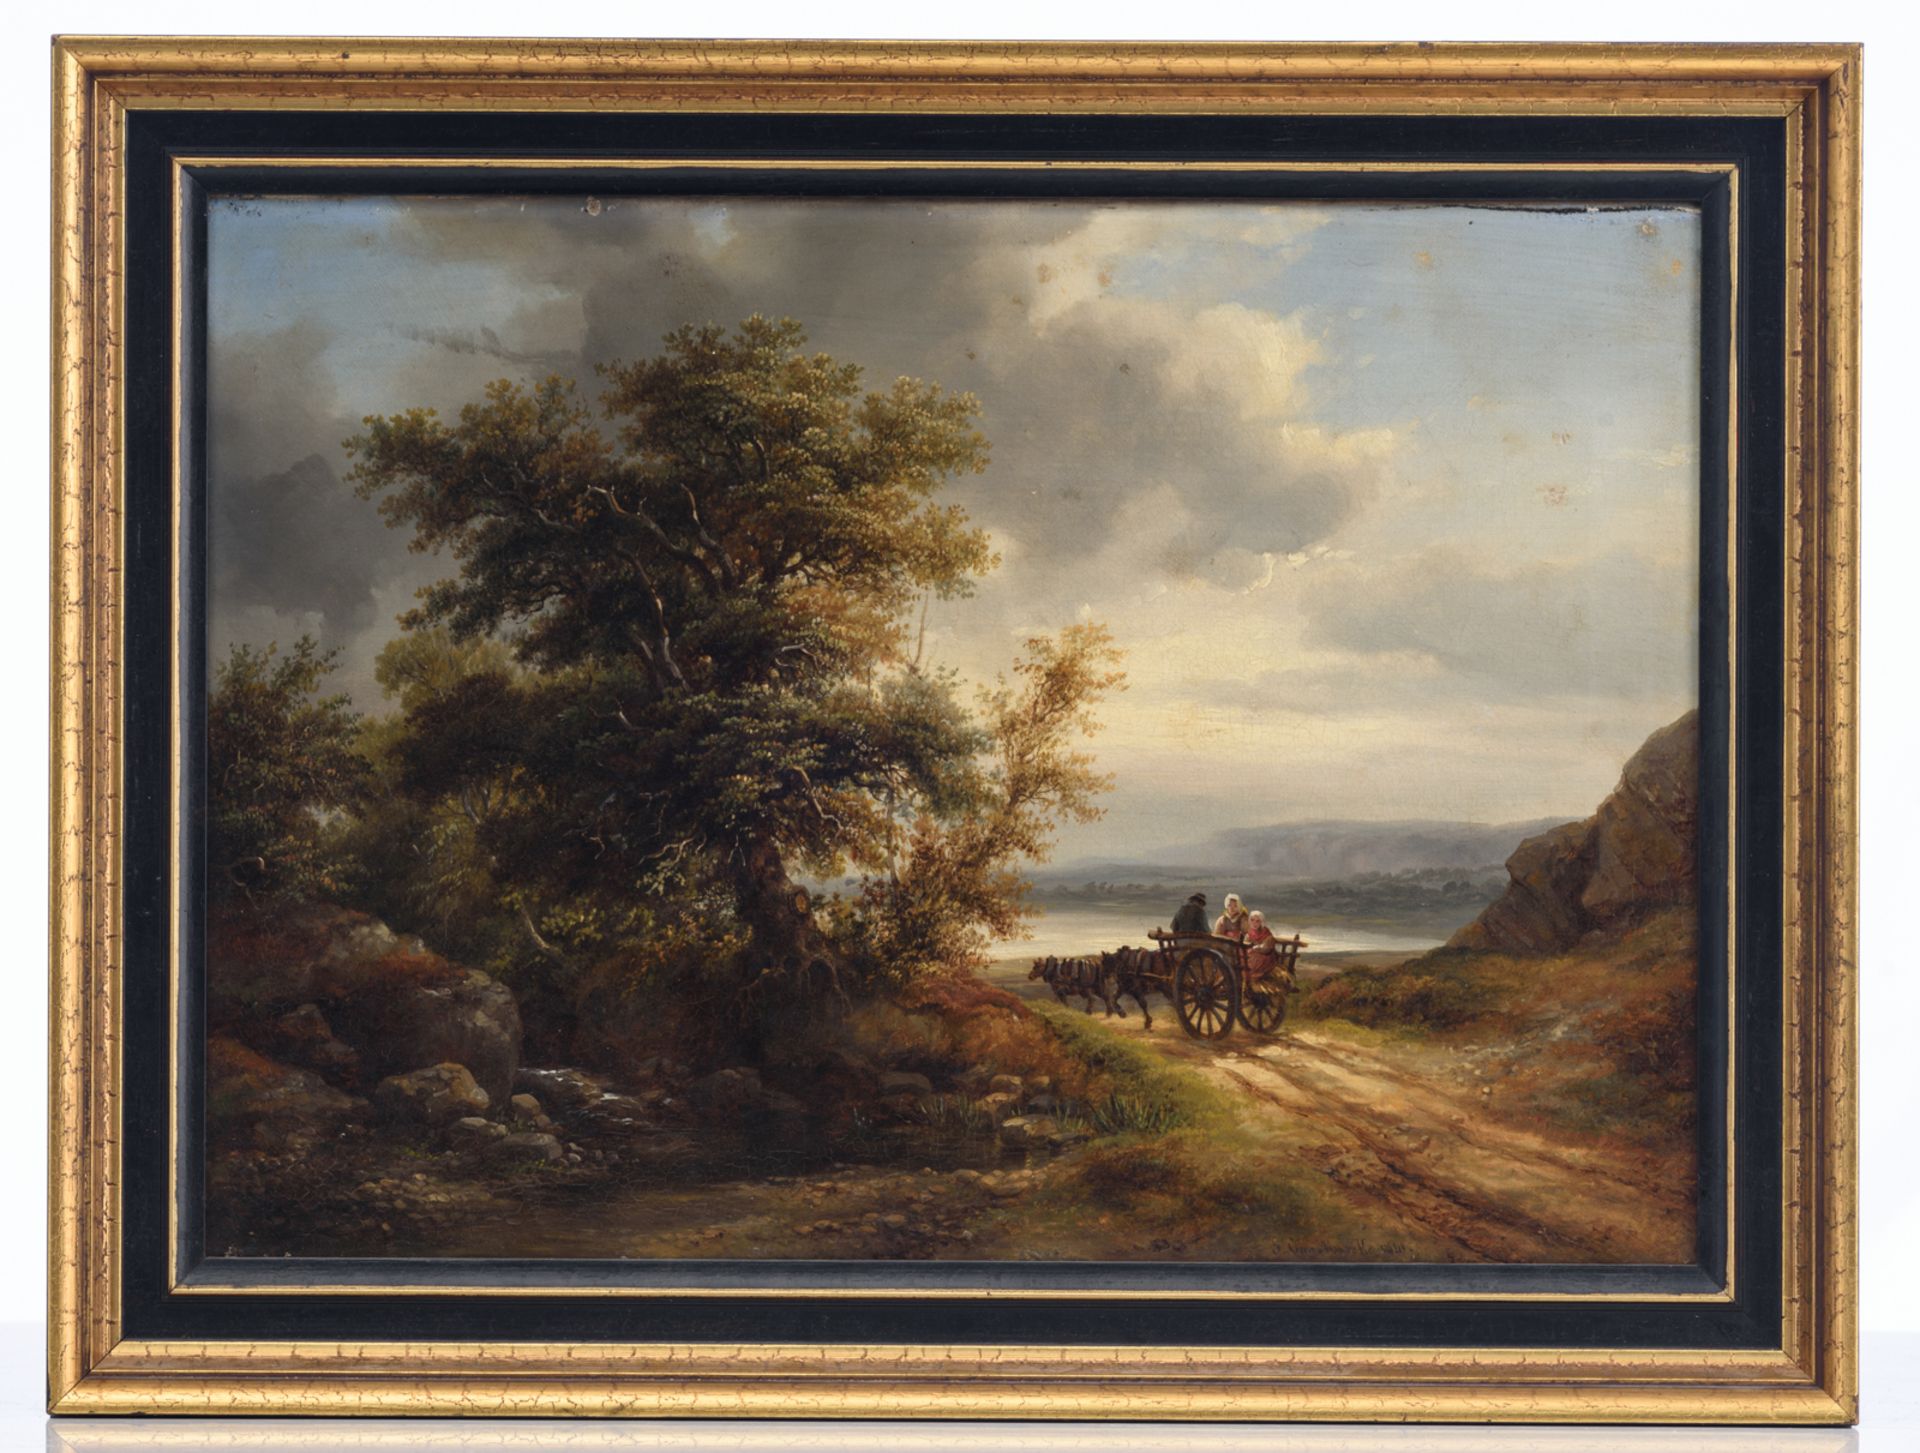 Van Marcke J., a wooded landscape with a horse-drawn carriage, dated 1841, oil on canvas, 33 x 46 cm - Image 2 of 4